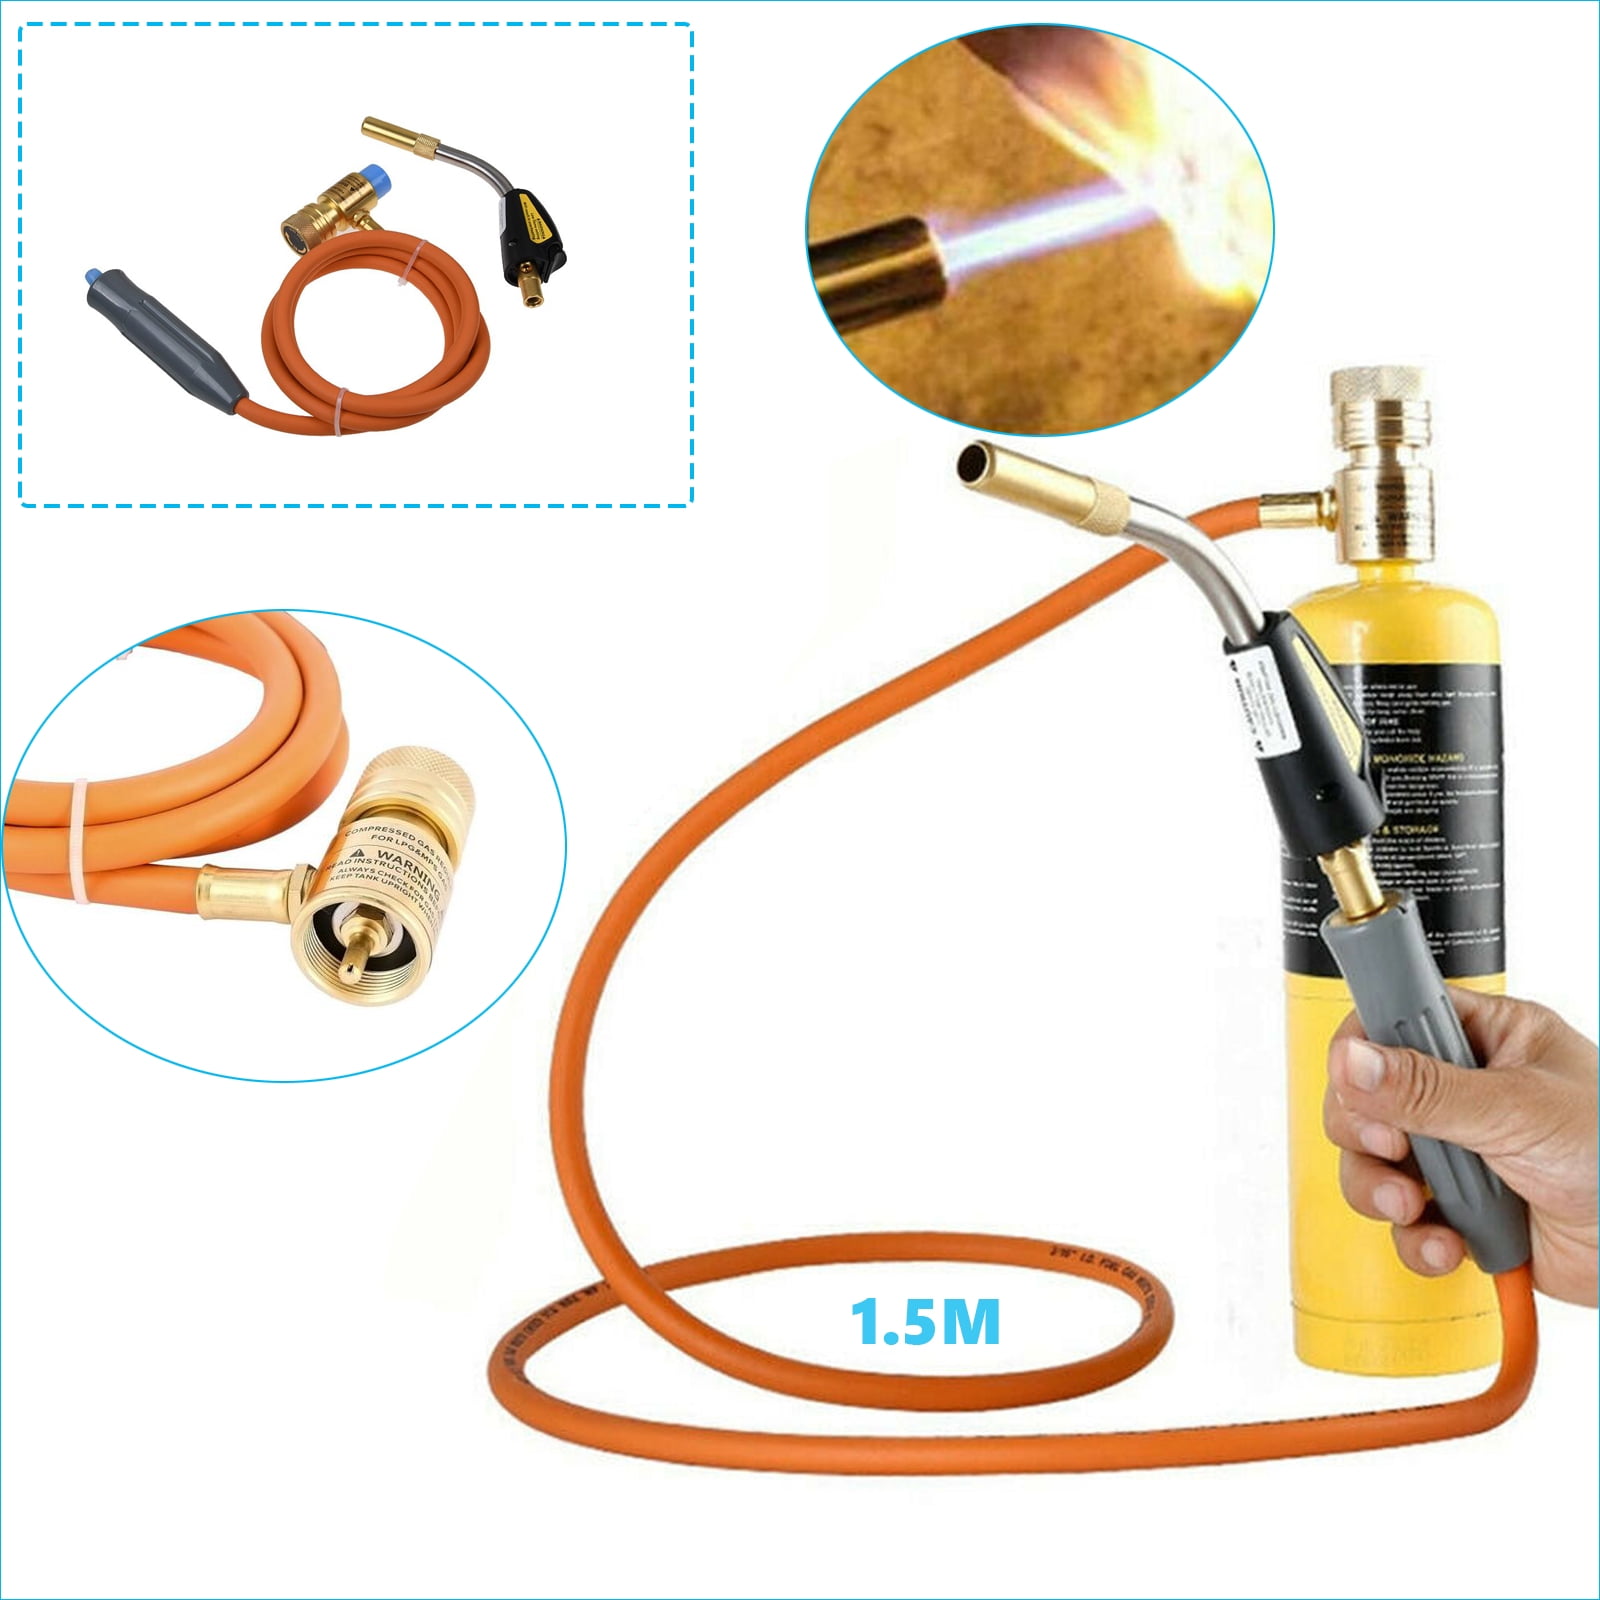 Brazing Welding Nozzle Blow Torches Mapp Propane Gas Plumbing Torch Cylinder NEW 